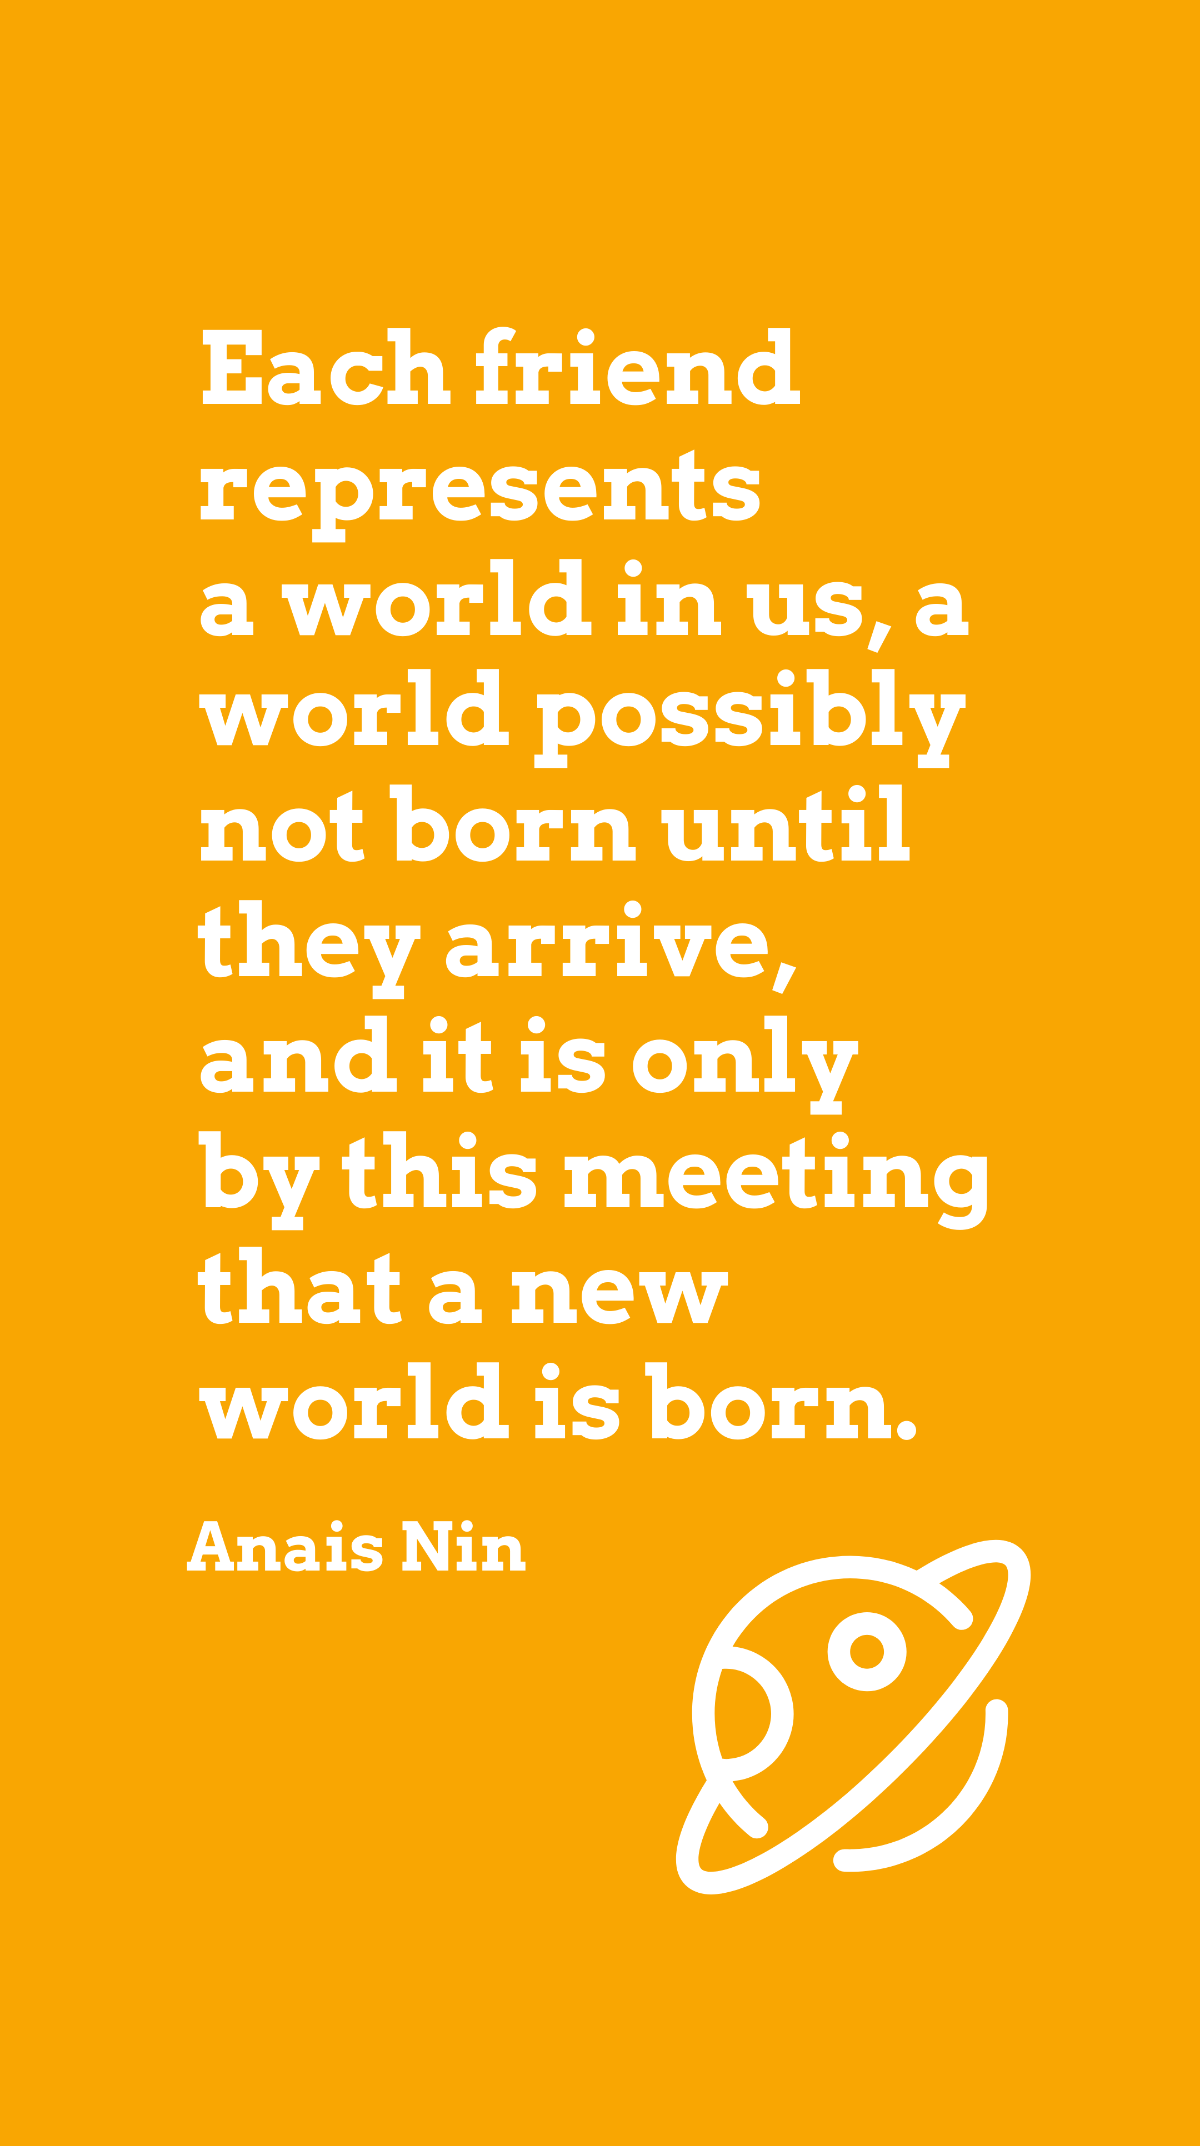 Anais Nin - Each friend represents a world in us, a world possibly not born until they arrive, and it is only by this meeting that a new world is born.